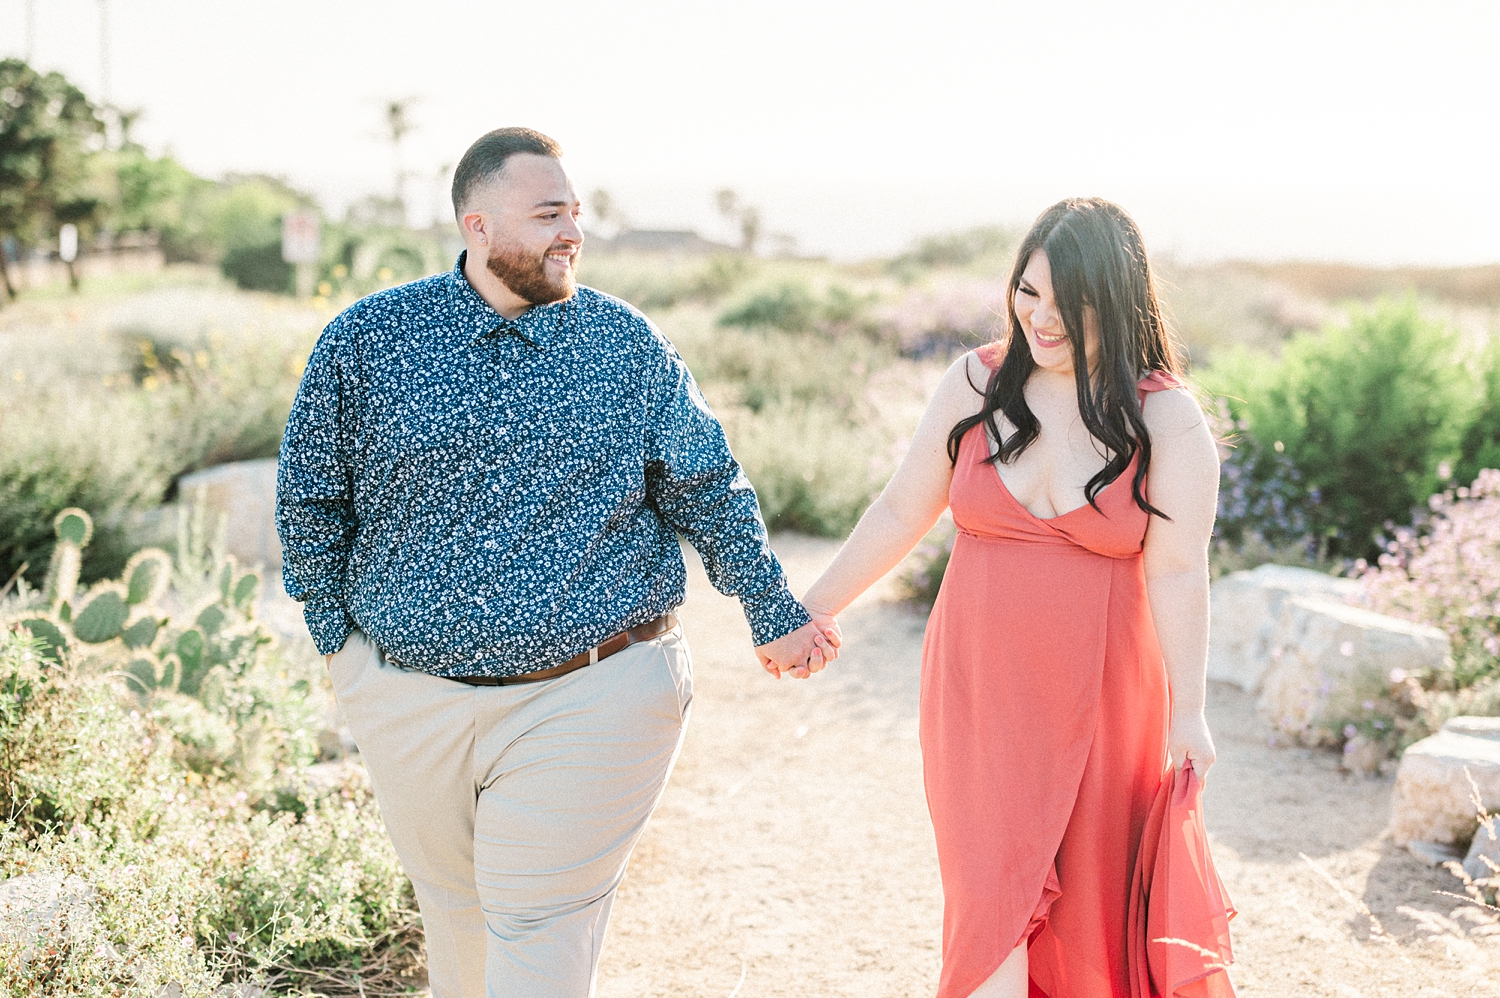 Beach Cliffs Engagement Session at Sunset | Nataly Hernandez Photography | Edwin and Susana-27.jpg